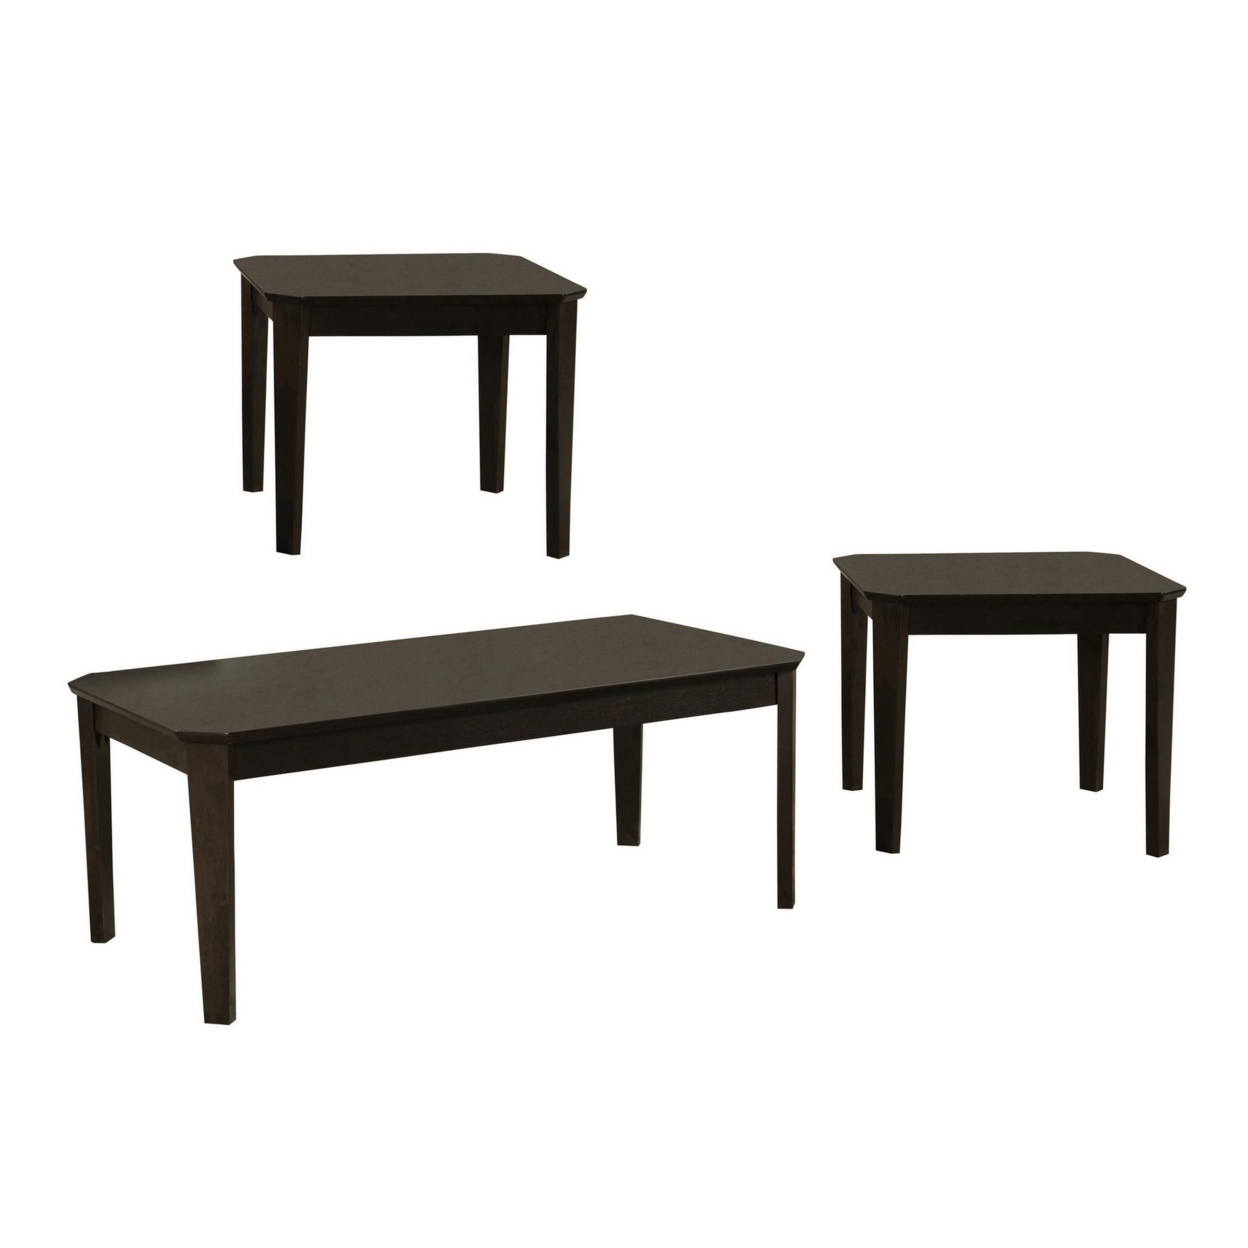 3 Piece Rectangular Coffee And Square End Table Set, Sleek Espresso Brown